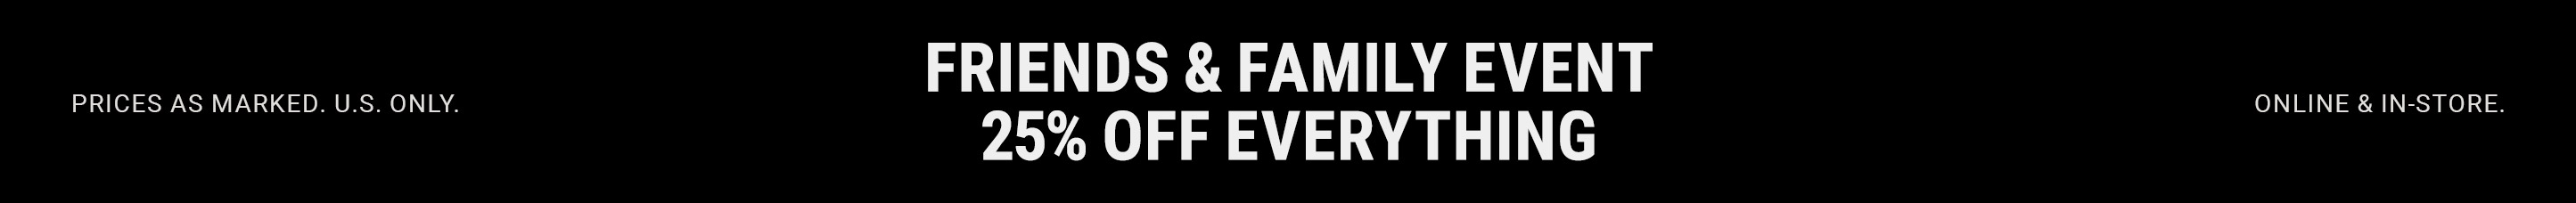 Friends & Family Event. 25% off everything